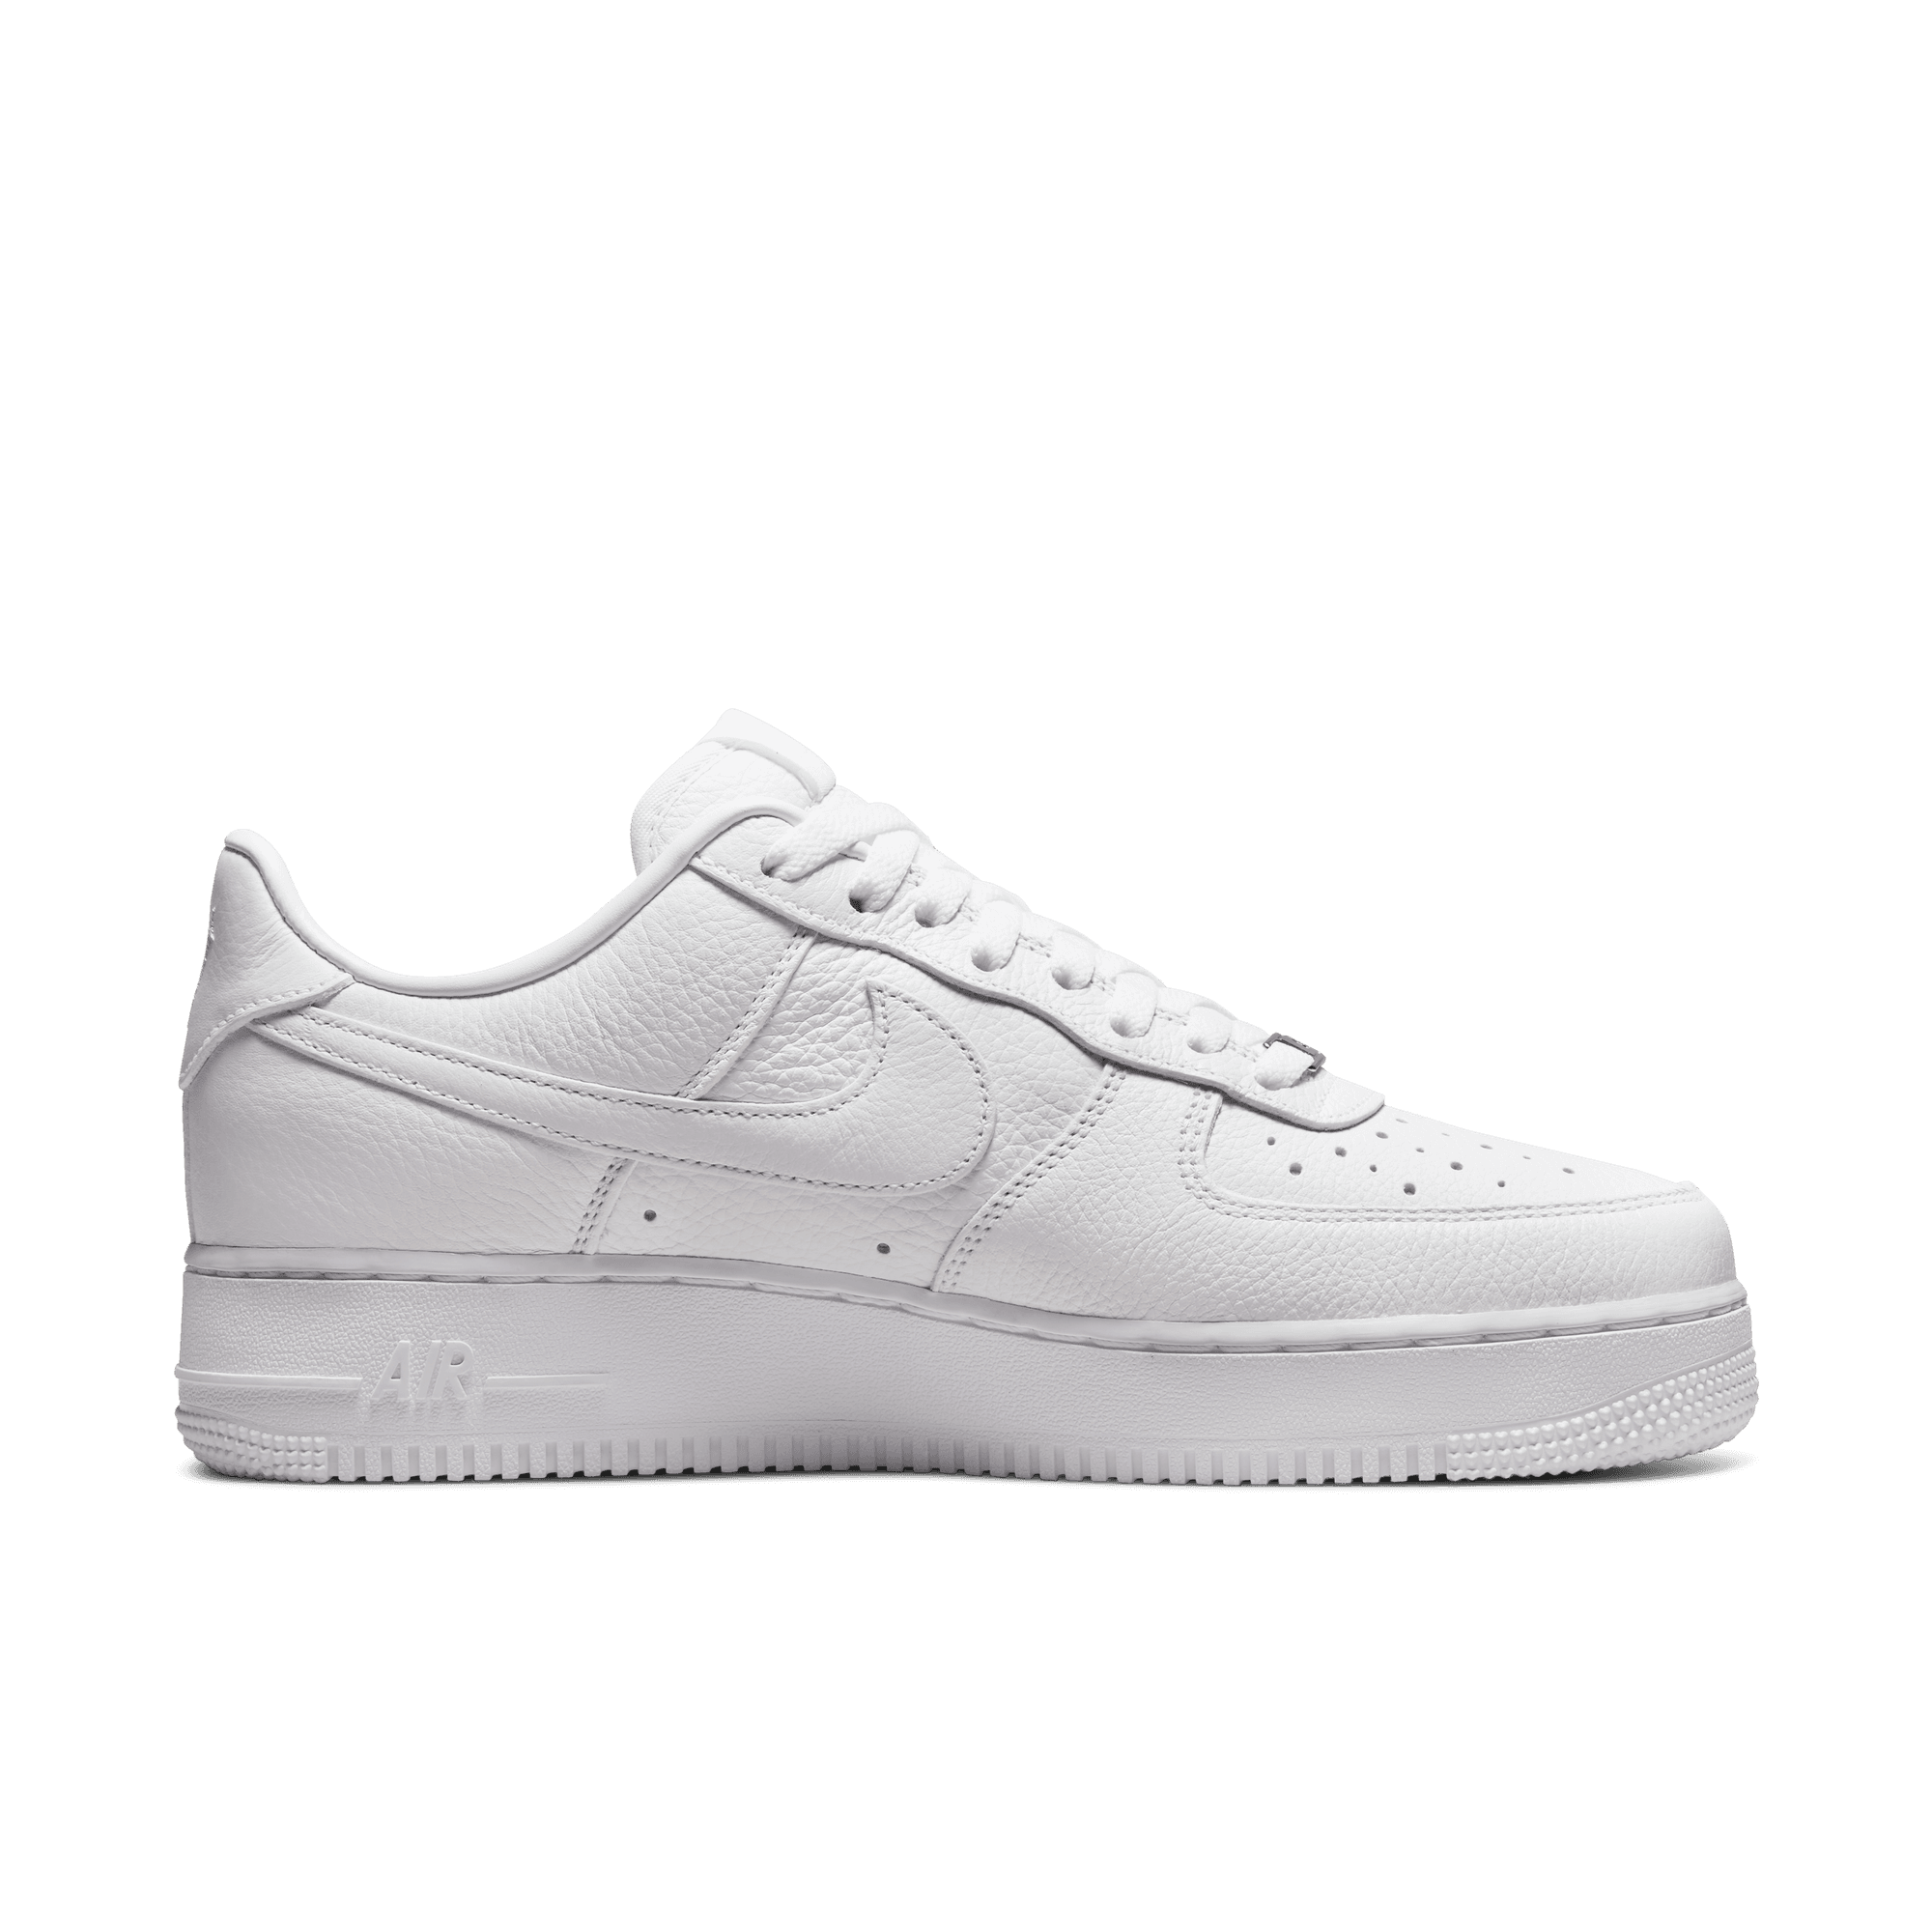 NOCTA X NIKE AIR FORCE 1 LOW "CERTIFIED LOVER BOY"